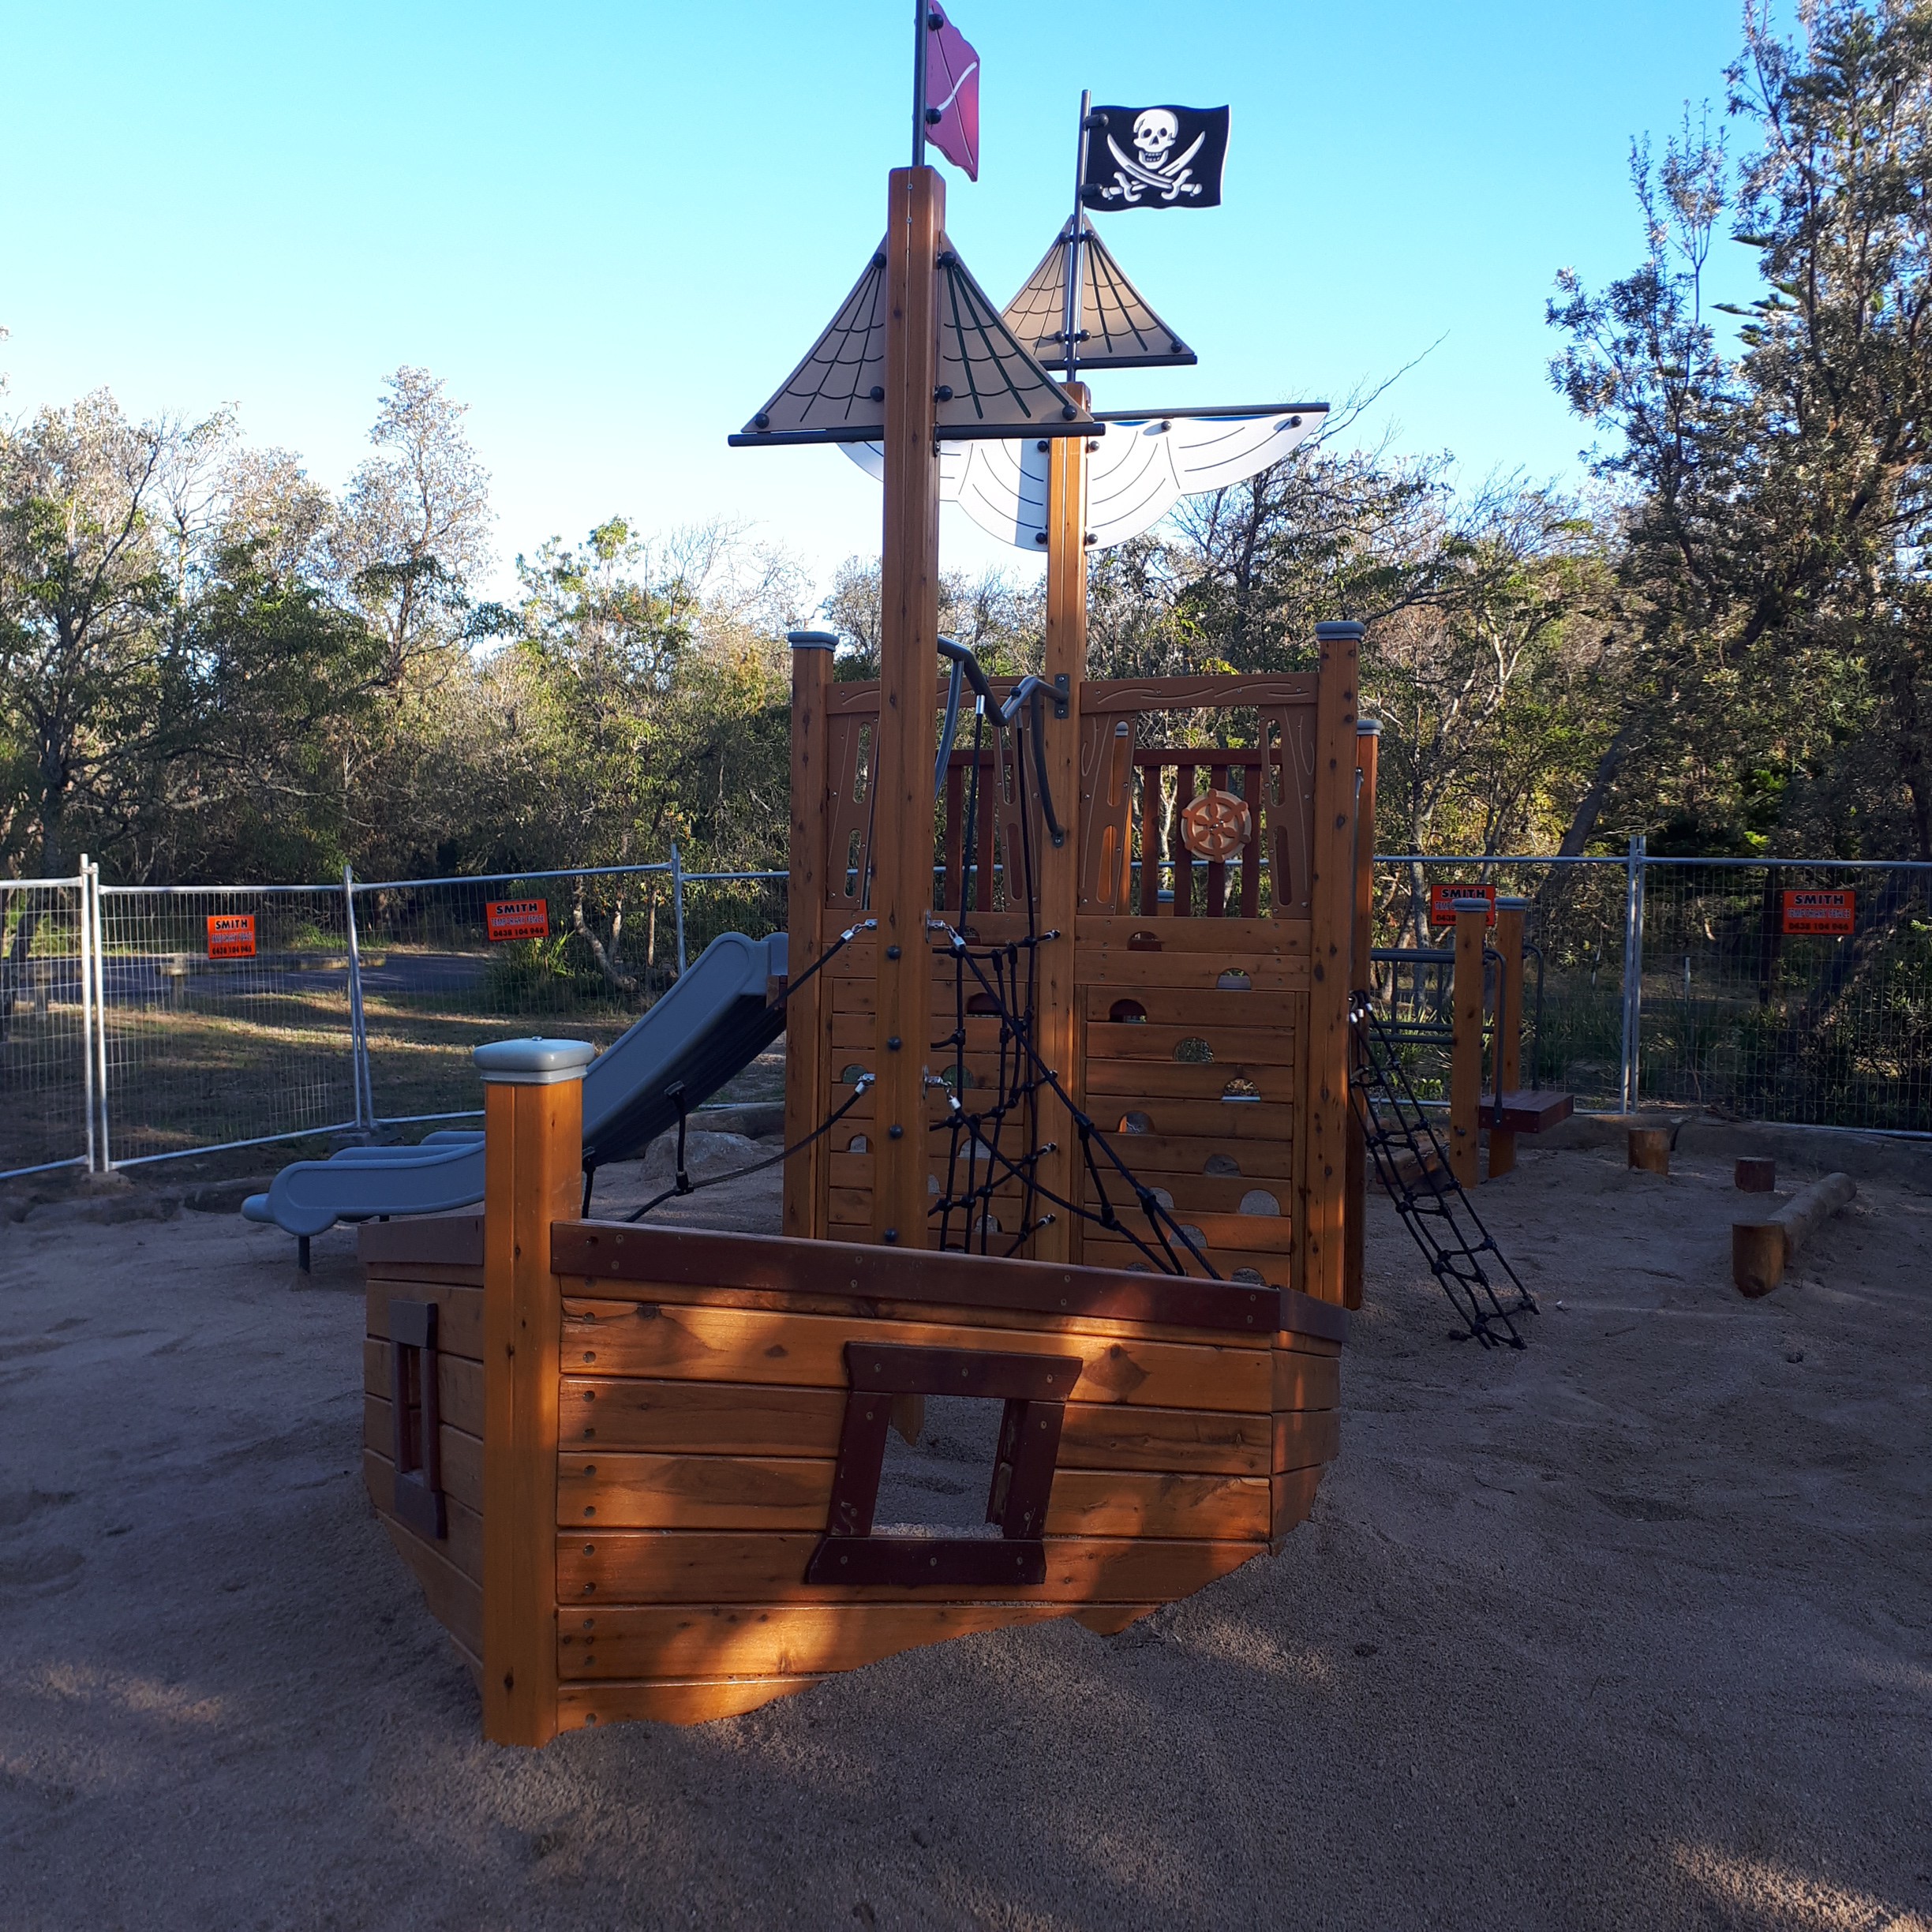 Pirate ships, flying foxes, pathways and picnics await local kids when restrictions ease